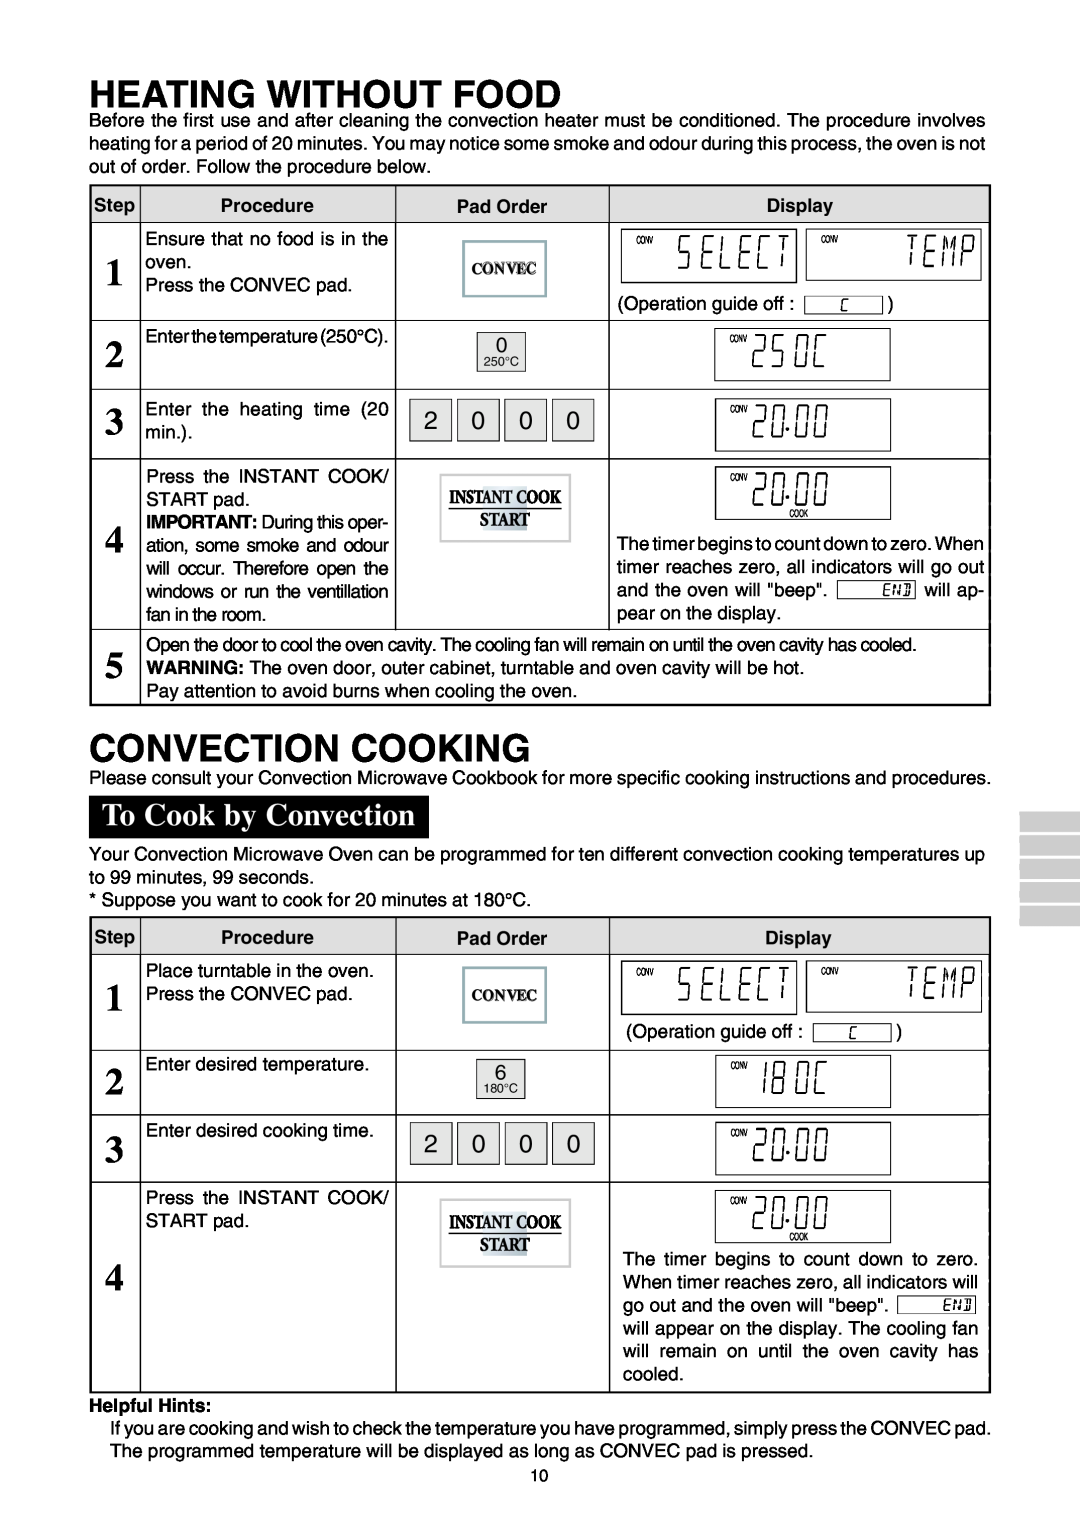 Sharp R-980E operation manual Heating Without Food, Convection Cooking, To Cook by Convection 